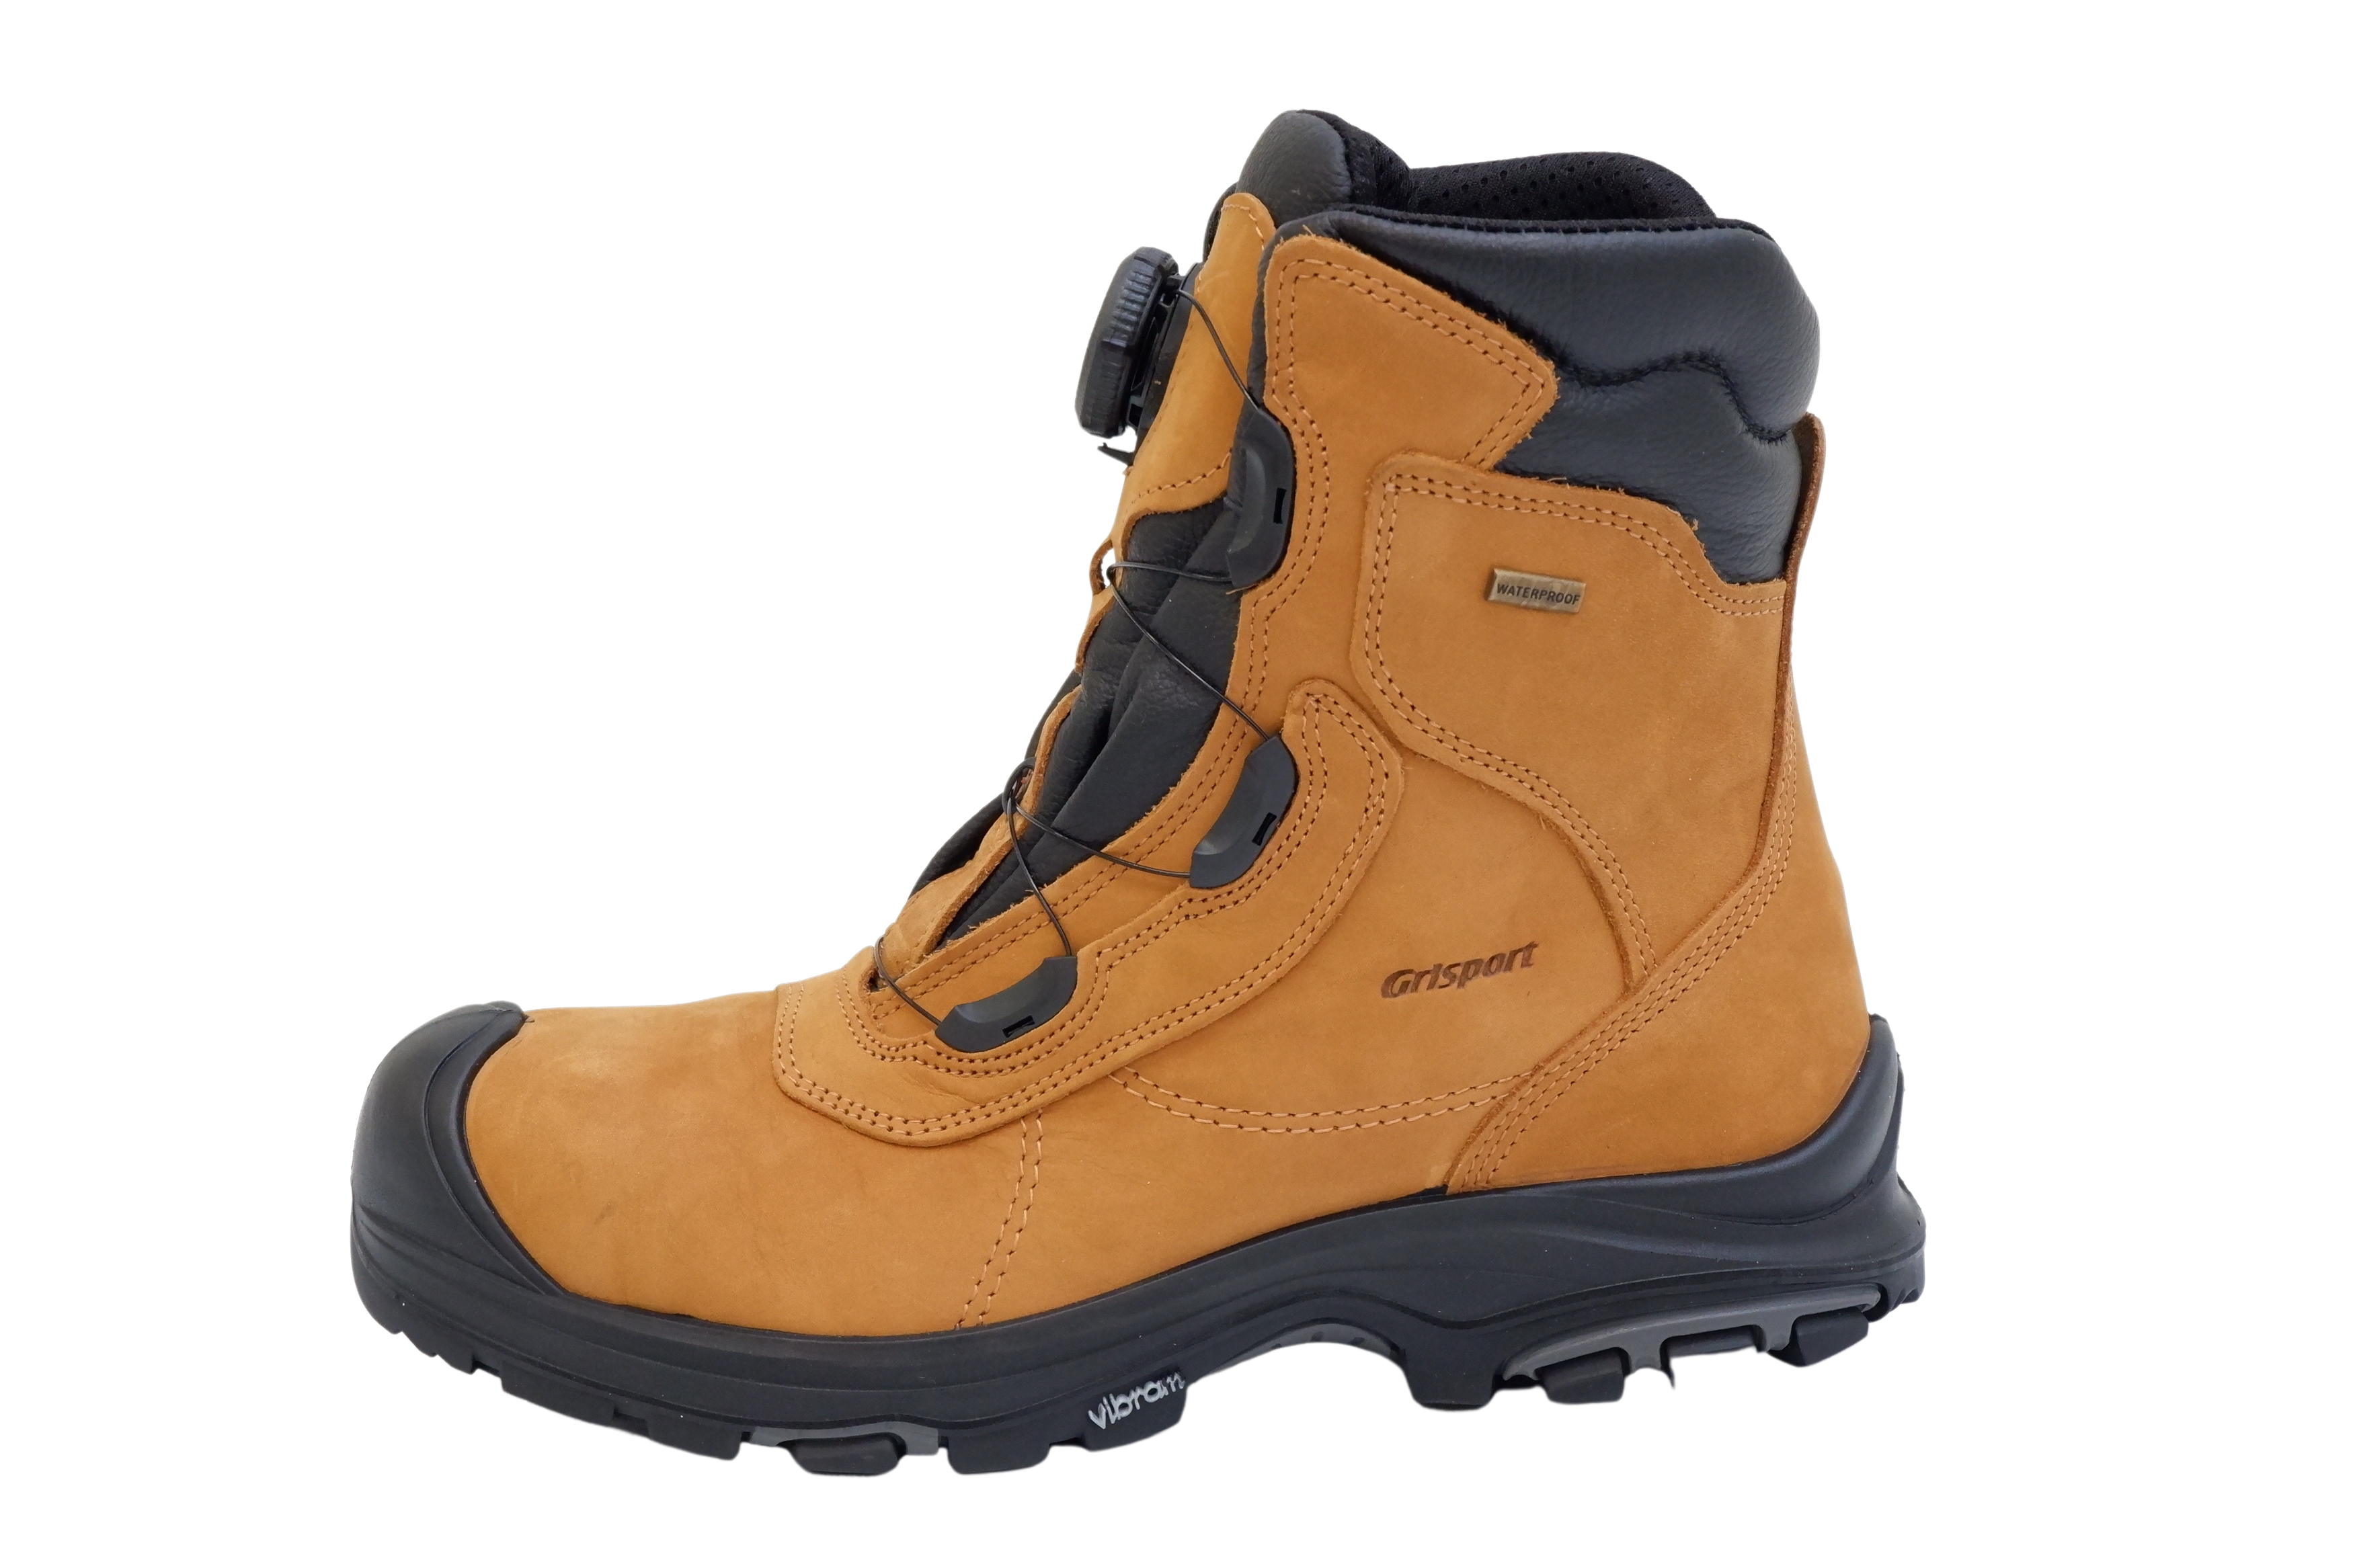 Grisport Men's Safety Work Boots BOA Desert 8" Waterproof with Vibram® Sole and Perforated Steel Toe Cap Sizes 7-13